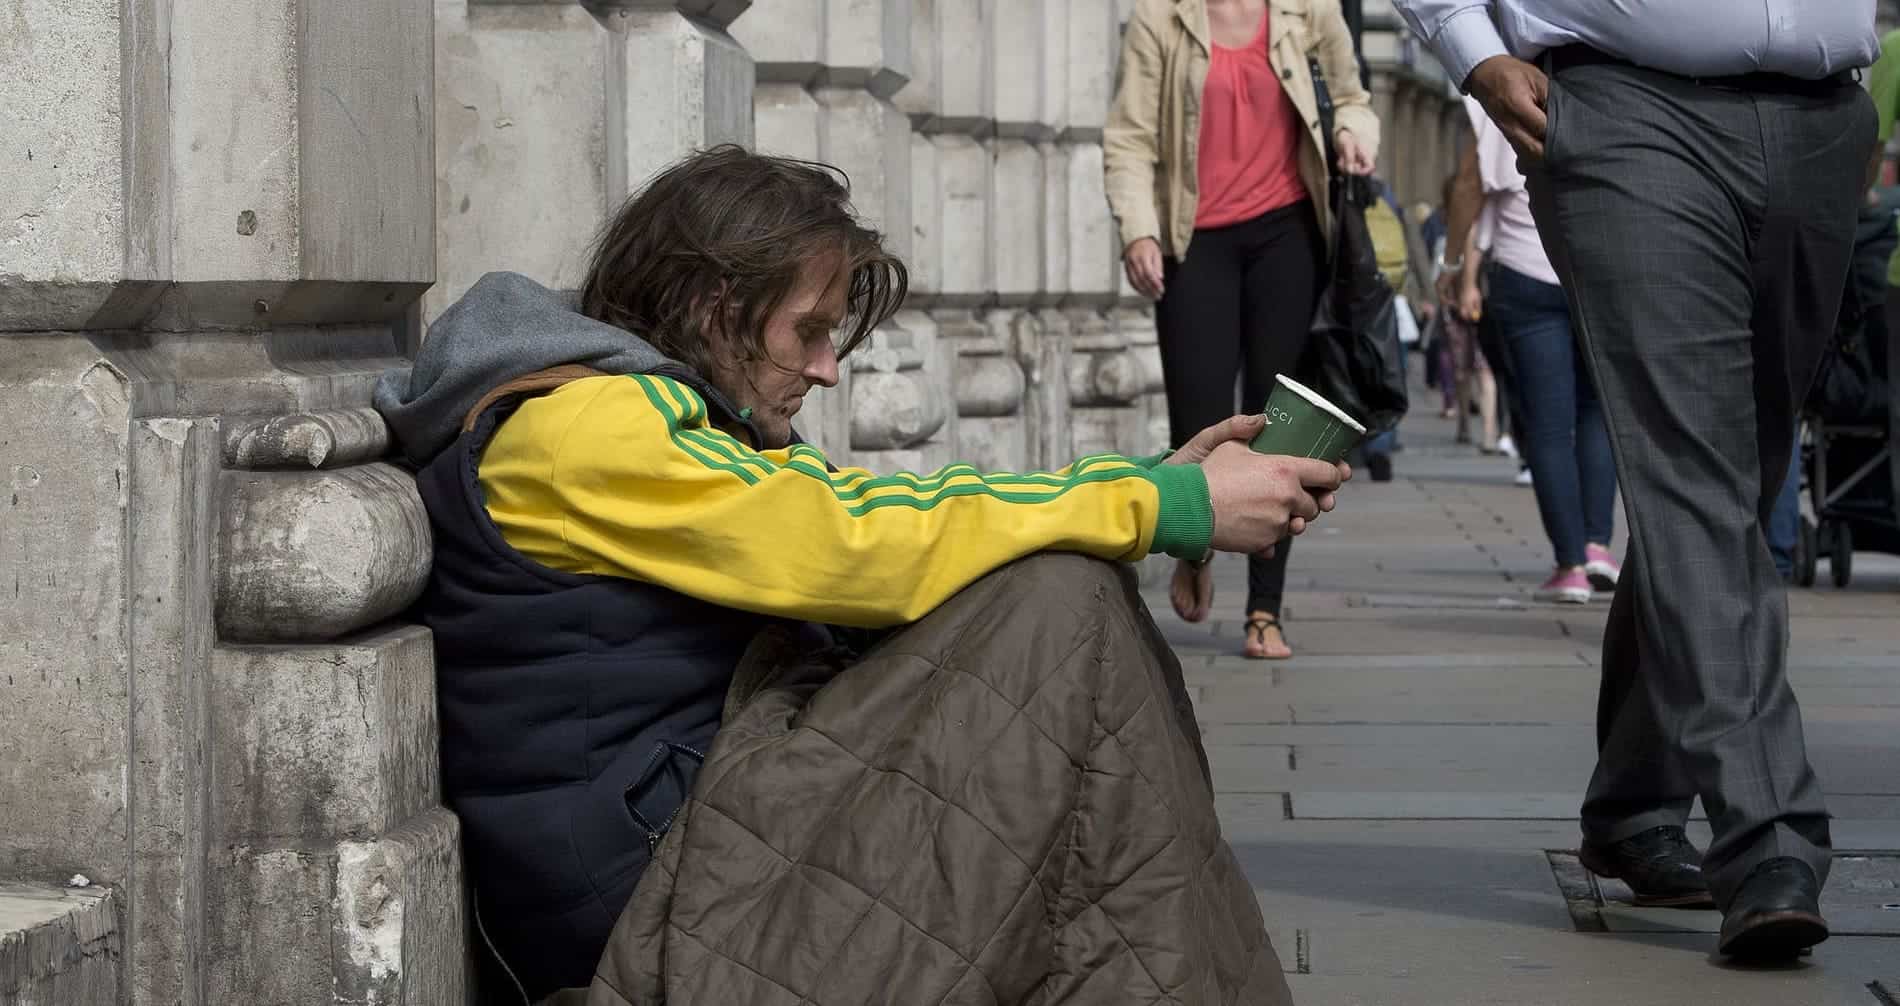 Kick them when down? Charity slams Govt over proposed fines for beggars